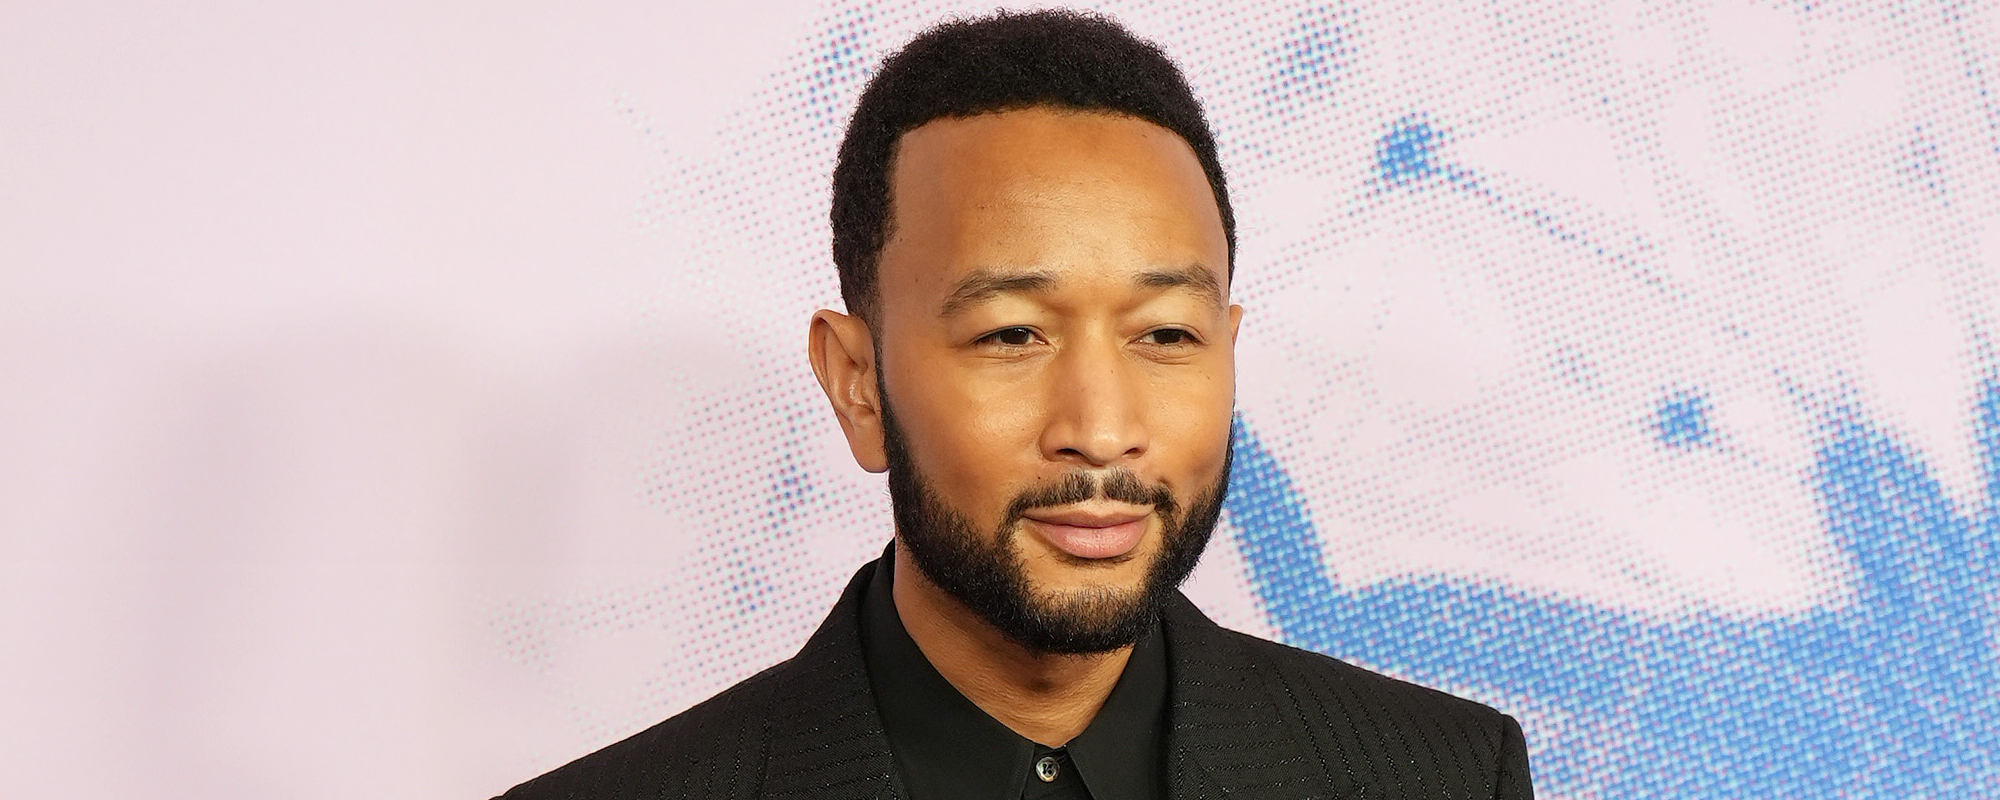 John Legend Rejects Idea of Blake Shelton Returning to ‘The Voice,’ but Leaves Door Open for Gwen Stefani